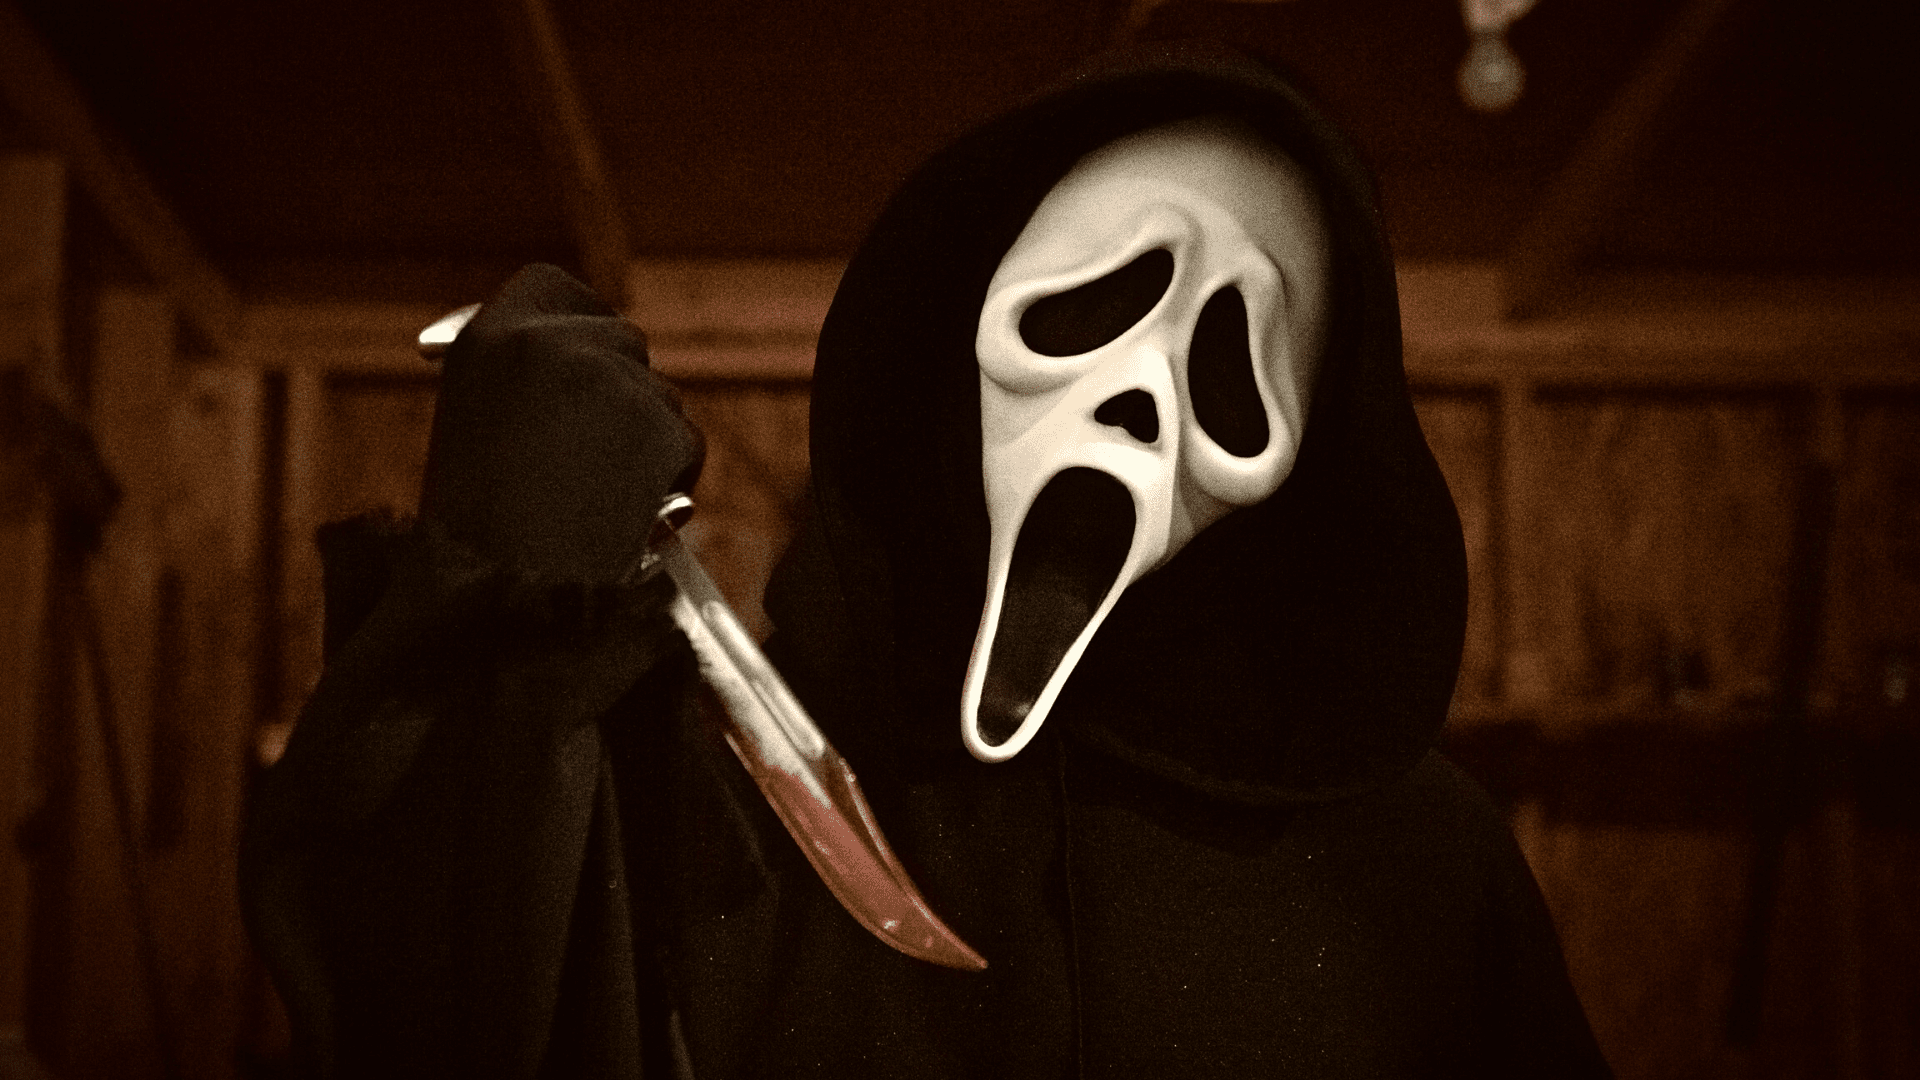 Scream 6 Trailer Breakdown: Does Gale (Courteney Cox) Die and Who